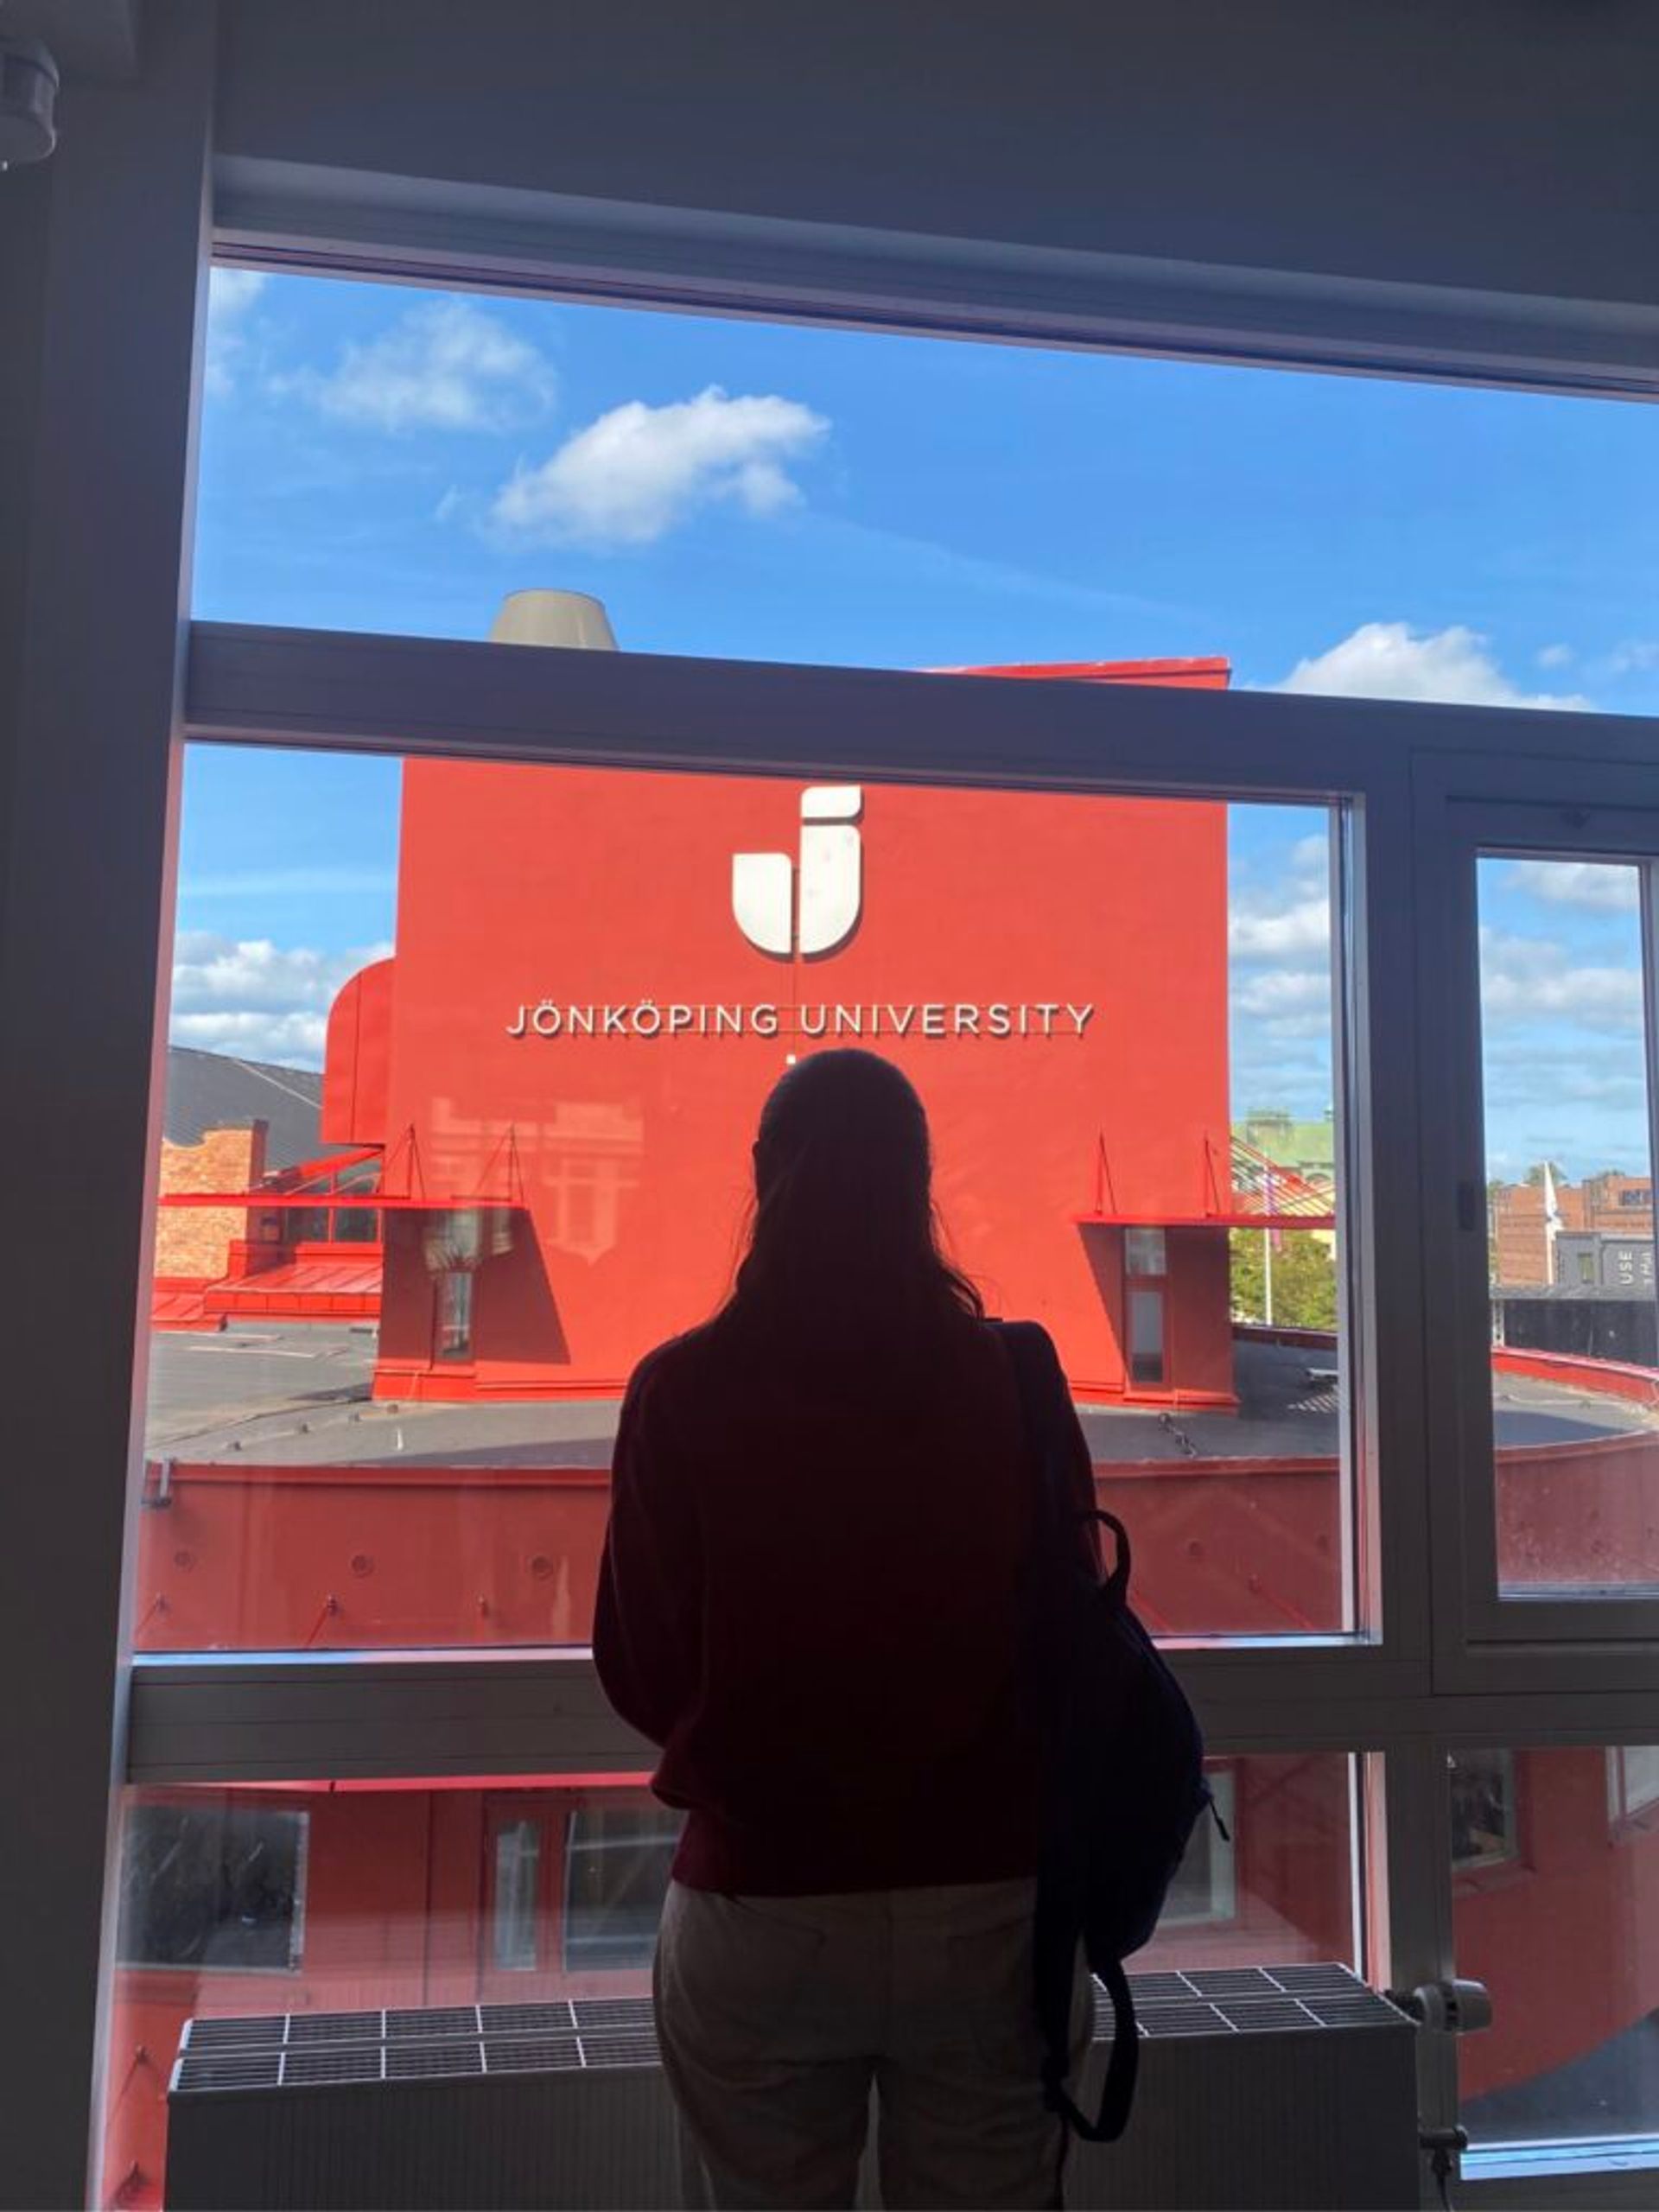 A person looks out a window at a Jönköping University sign.